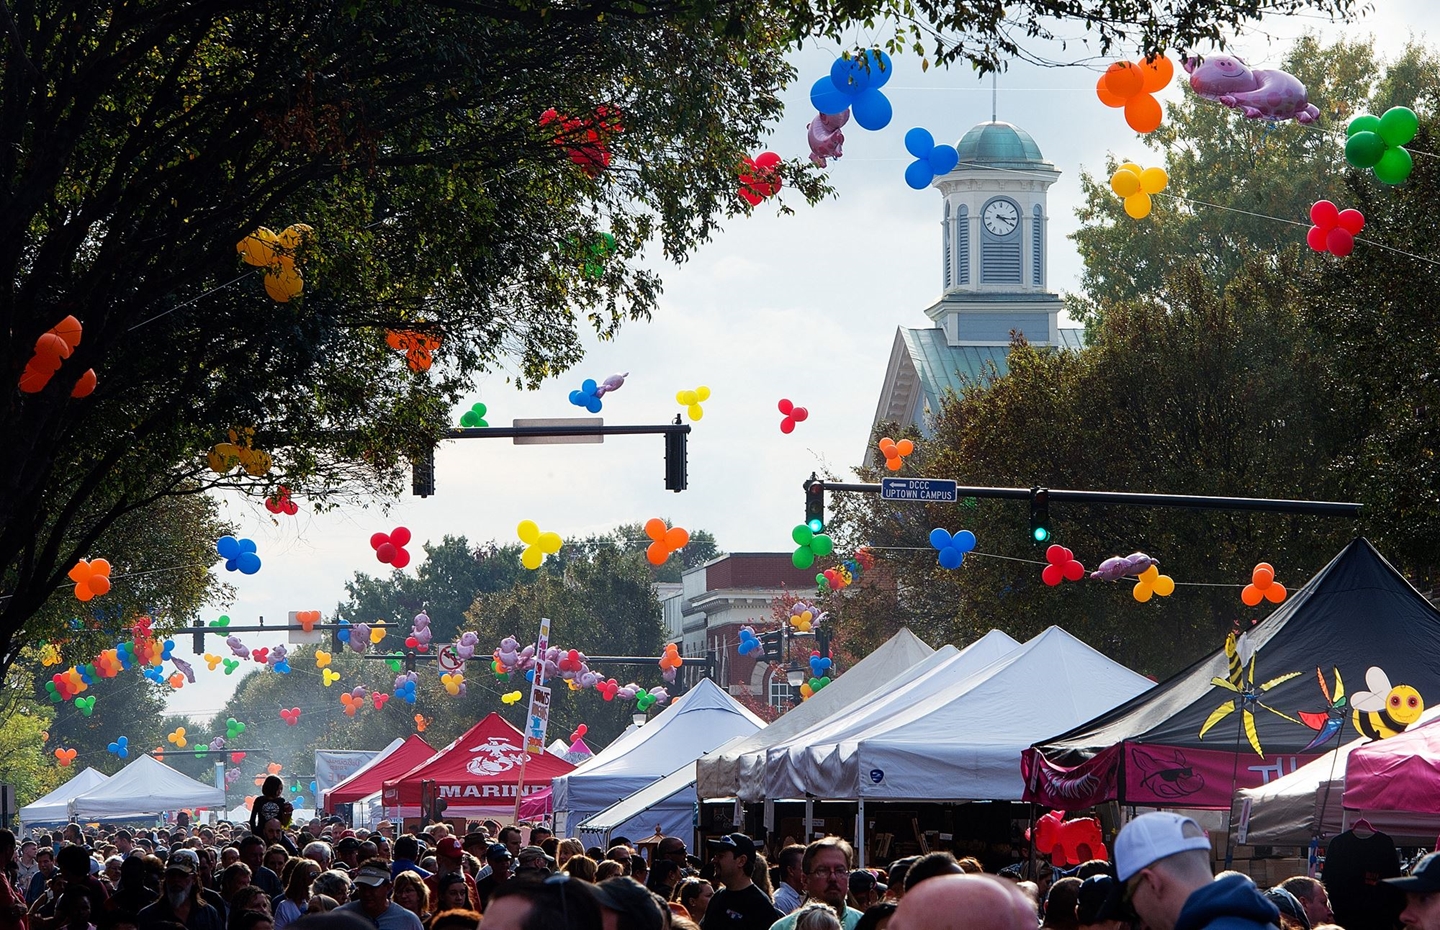 7 Best Fall Festivals to Visit in North Carolina (2021 Guide) Trips